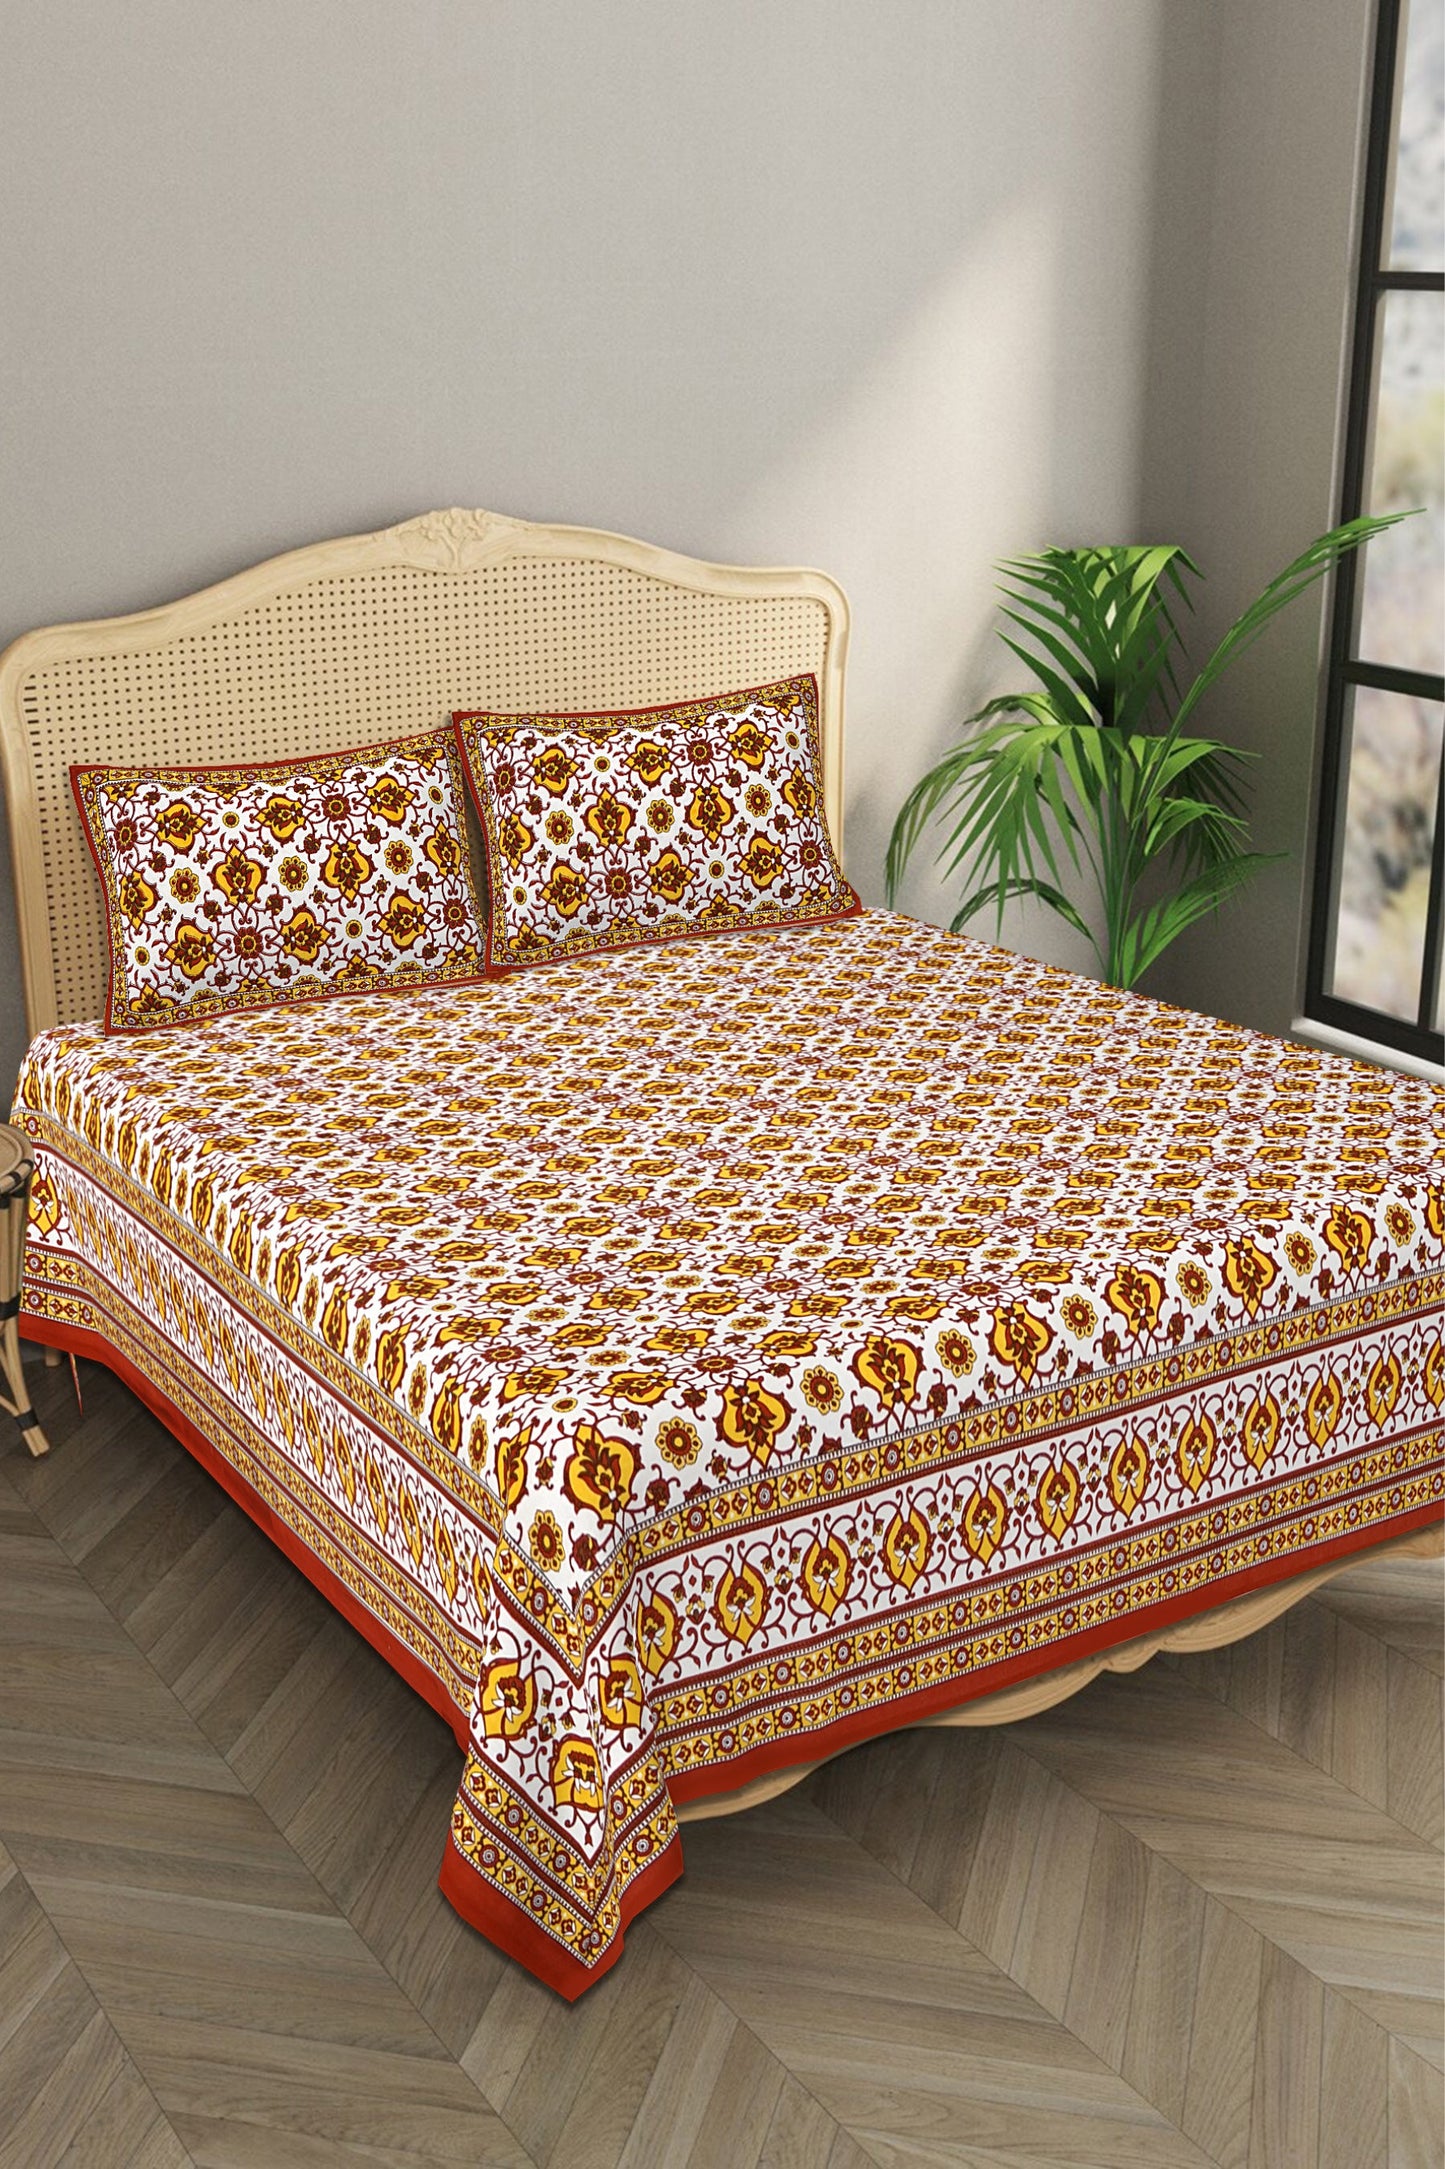 Beautifully Hand Crafted Moroccan Collection of Premium Sheets and Linens - Marrakesh Collection - Yellow Marikesh Double Bed Sheet with 2 Pillow Covers